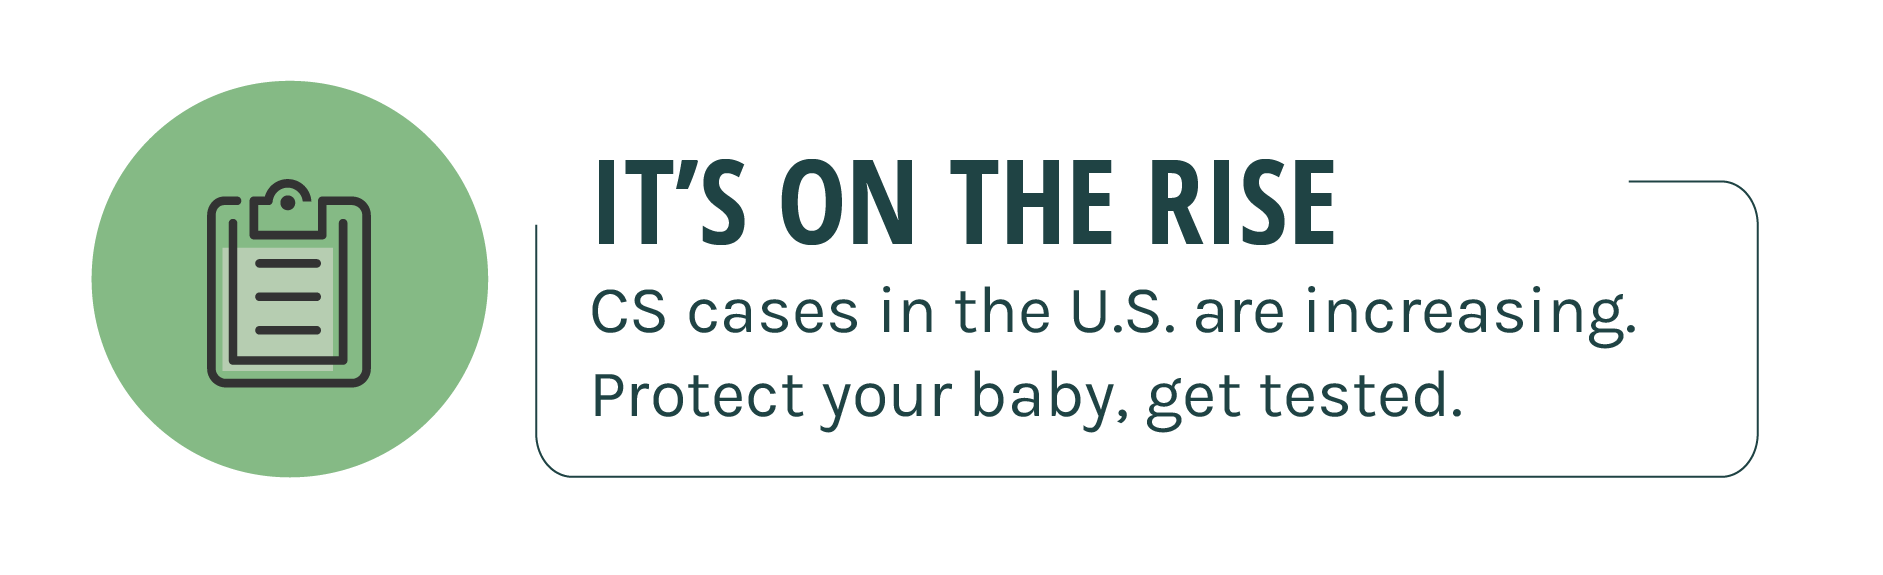 On the rise: CS cases in the U.S. are increasing. Protect your baby, get tested.